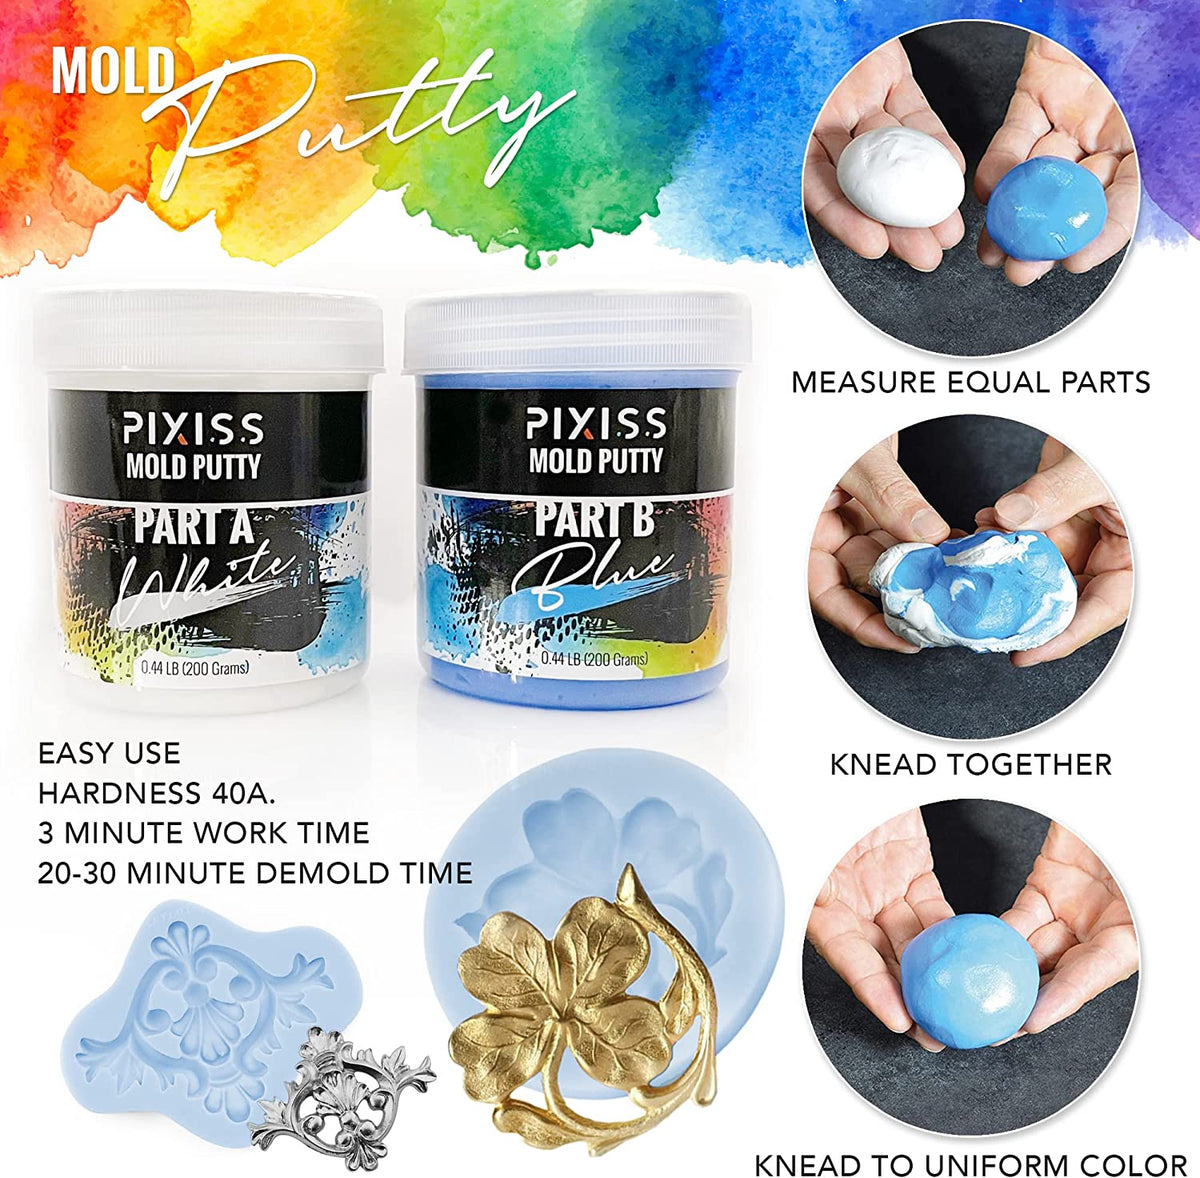 Moldable Putty (2 lbs) Silicone Mold Making Kit - For Creating Casting  Molds for Soap Making Supplies, Jewelry Making, Sculpting and More